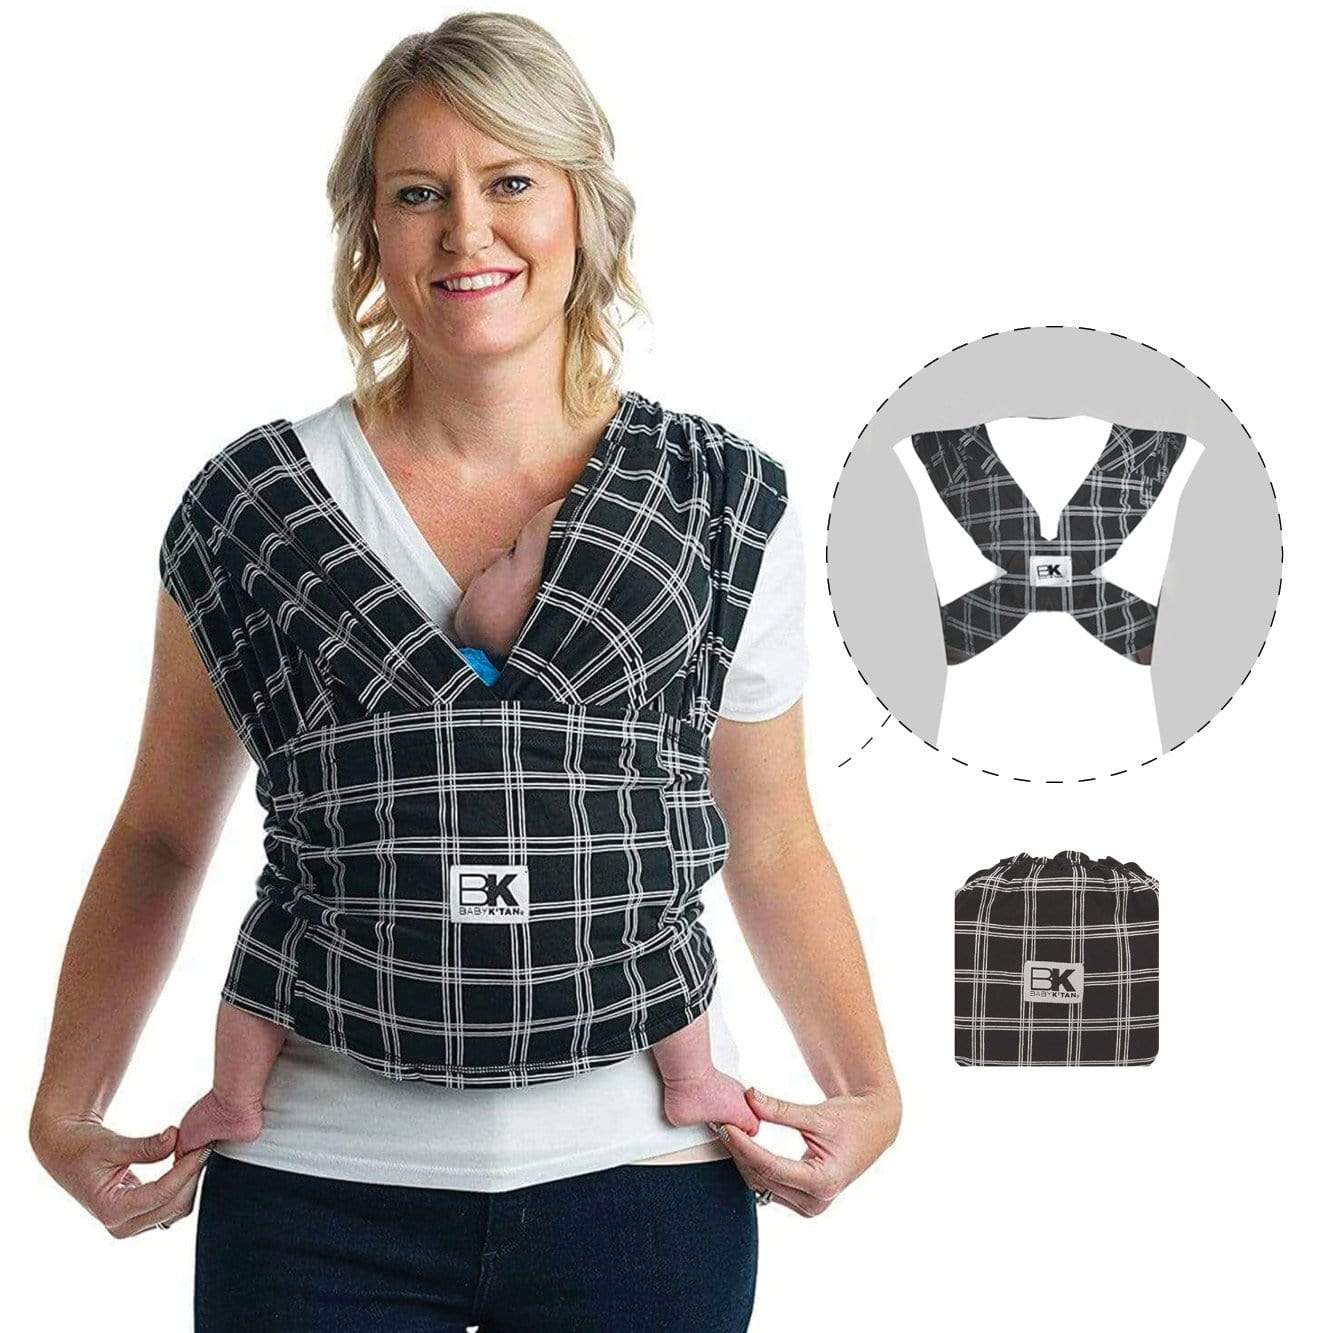 Baby K'tan Slings Baby K’tan Print Baby Carrier - Mad for Plaid Black